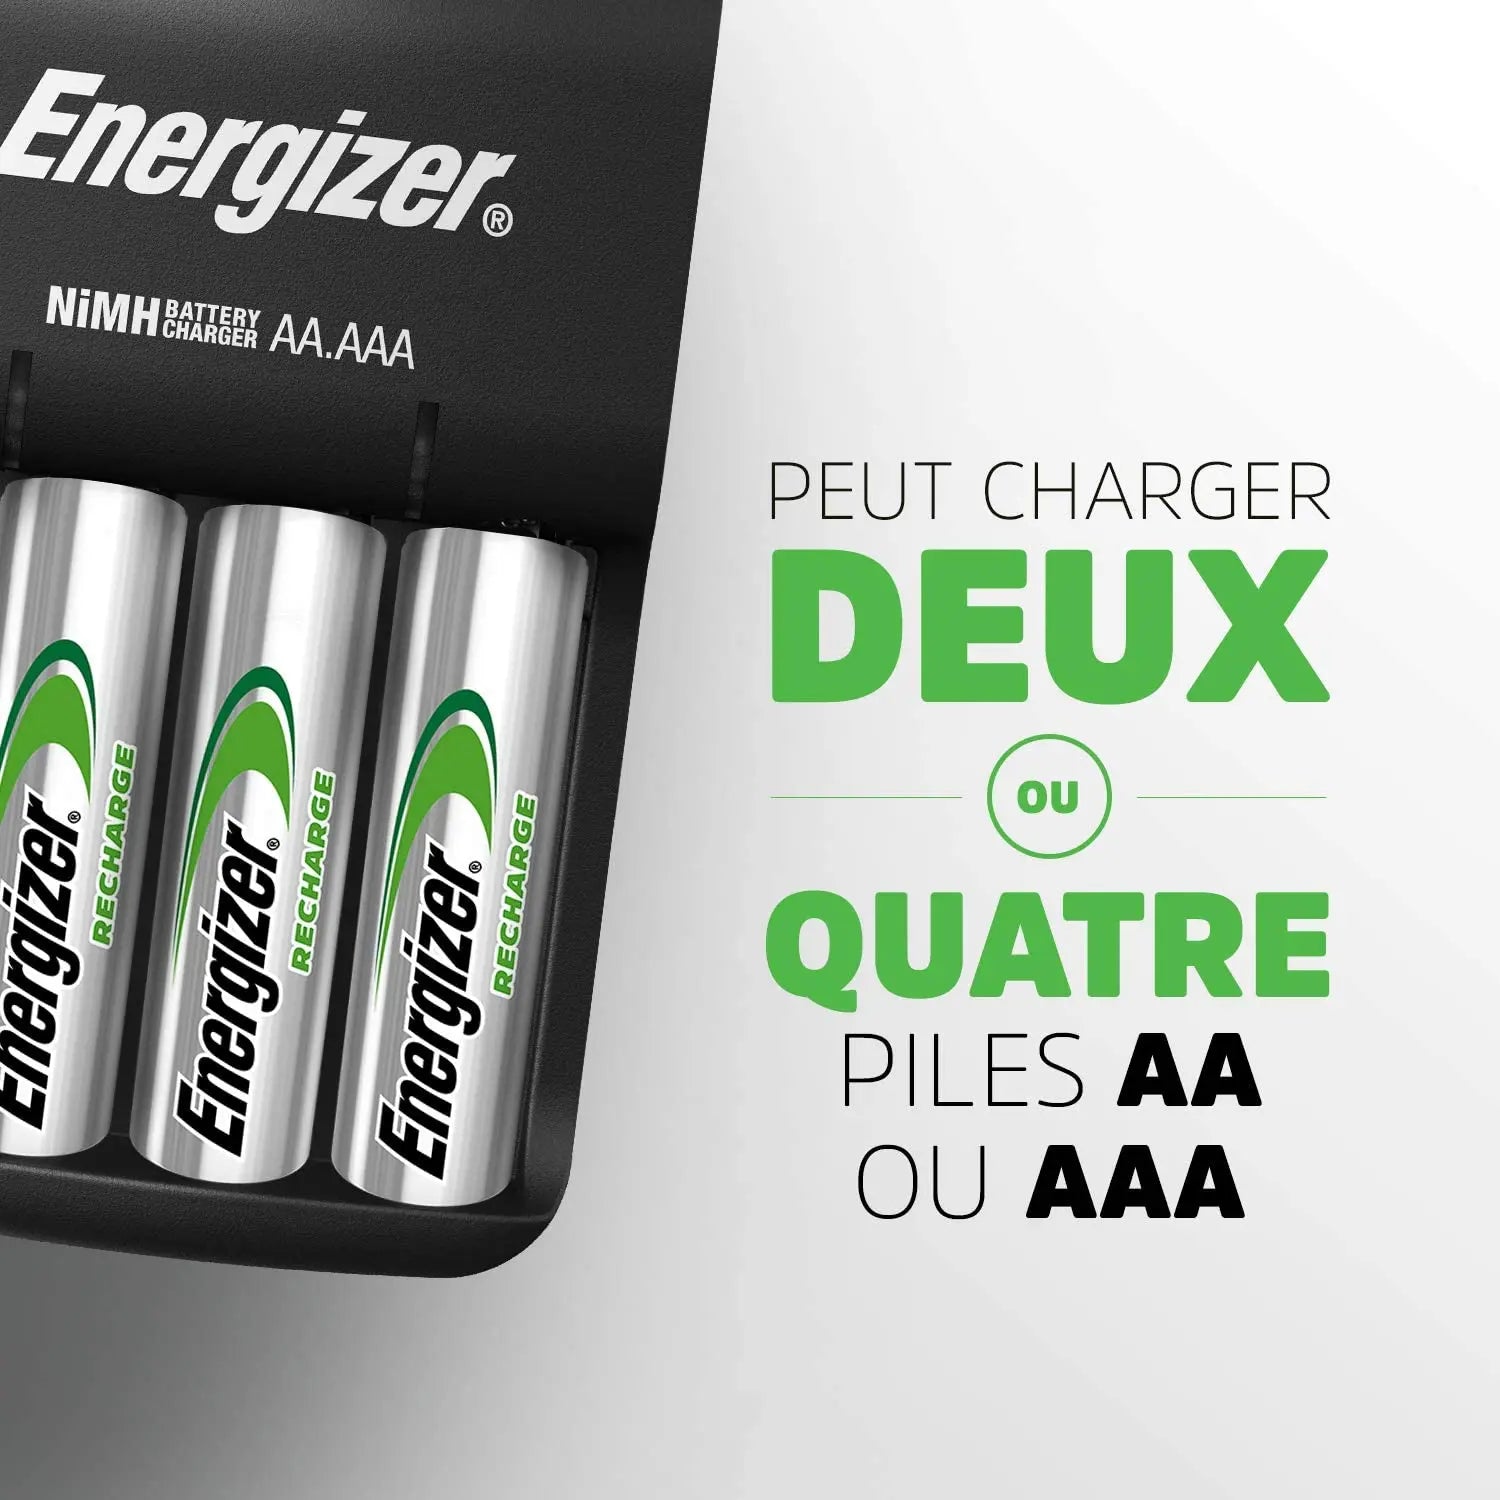 ENERGIZER - Mini Chargeur pour piles rechargeables AA/AAA + 2